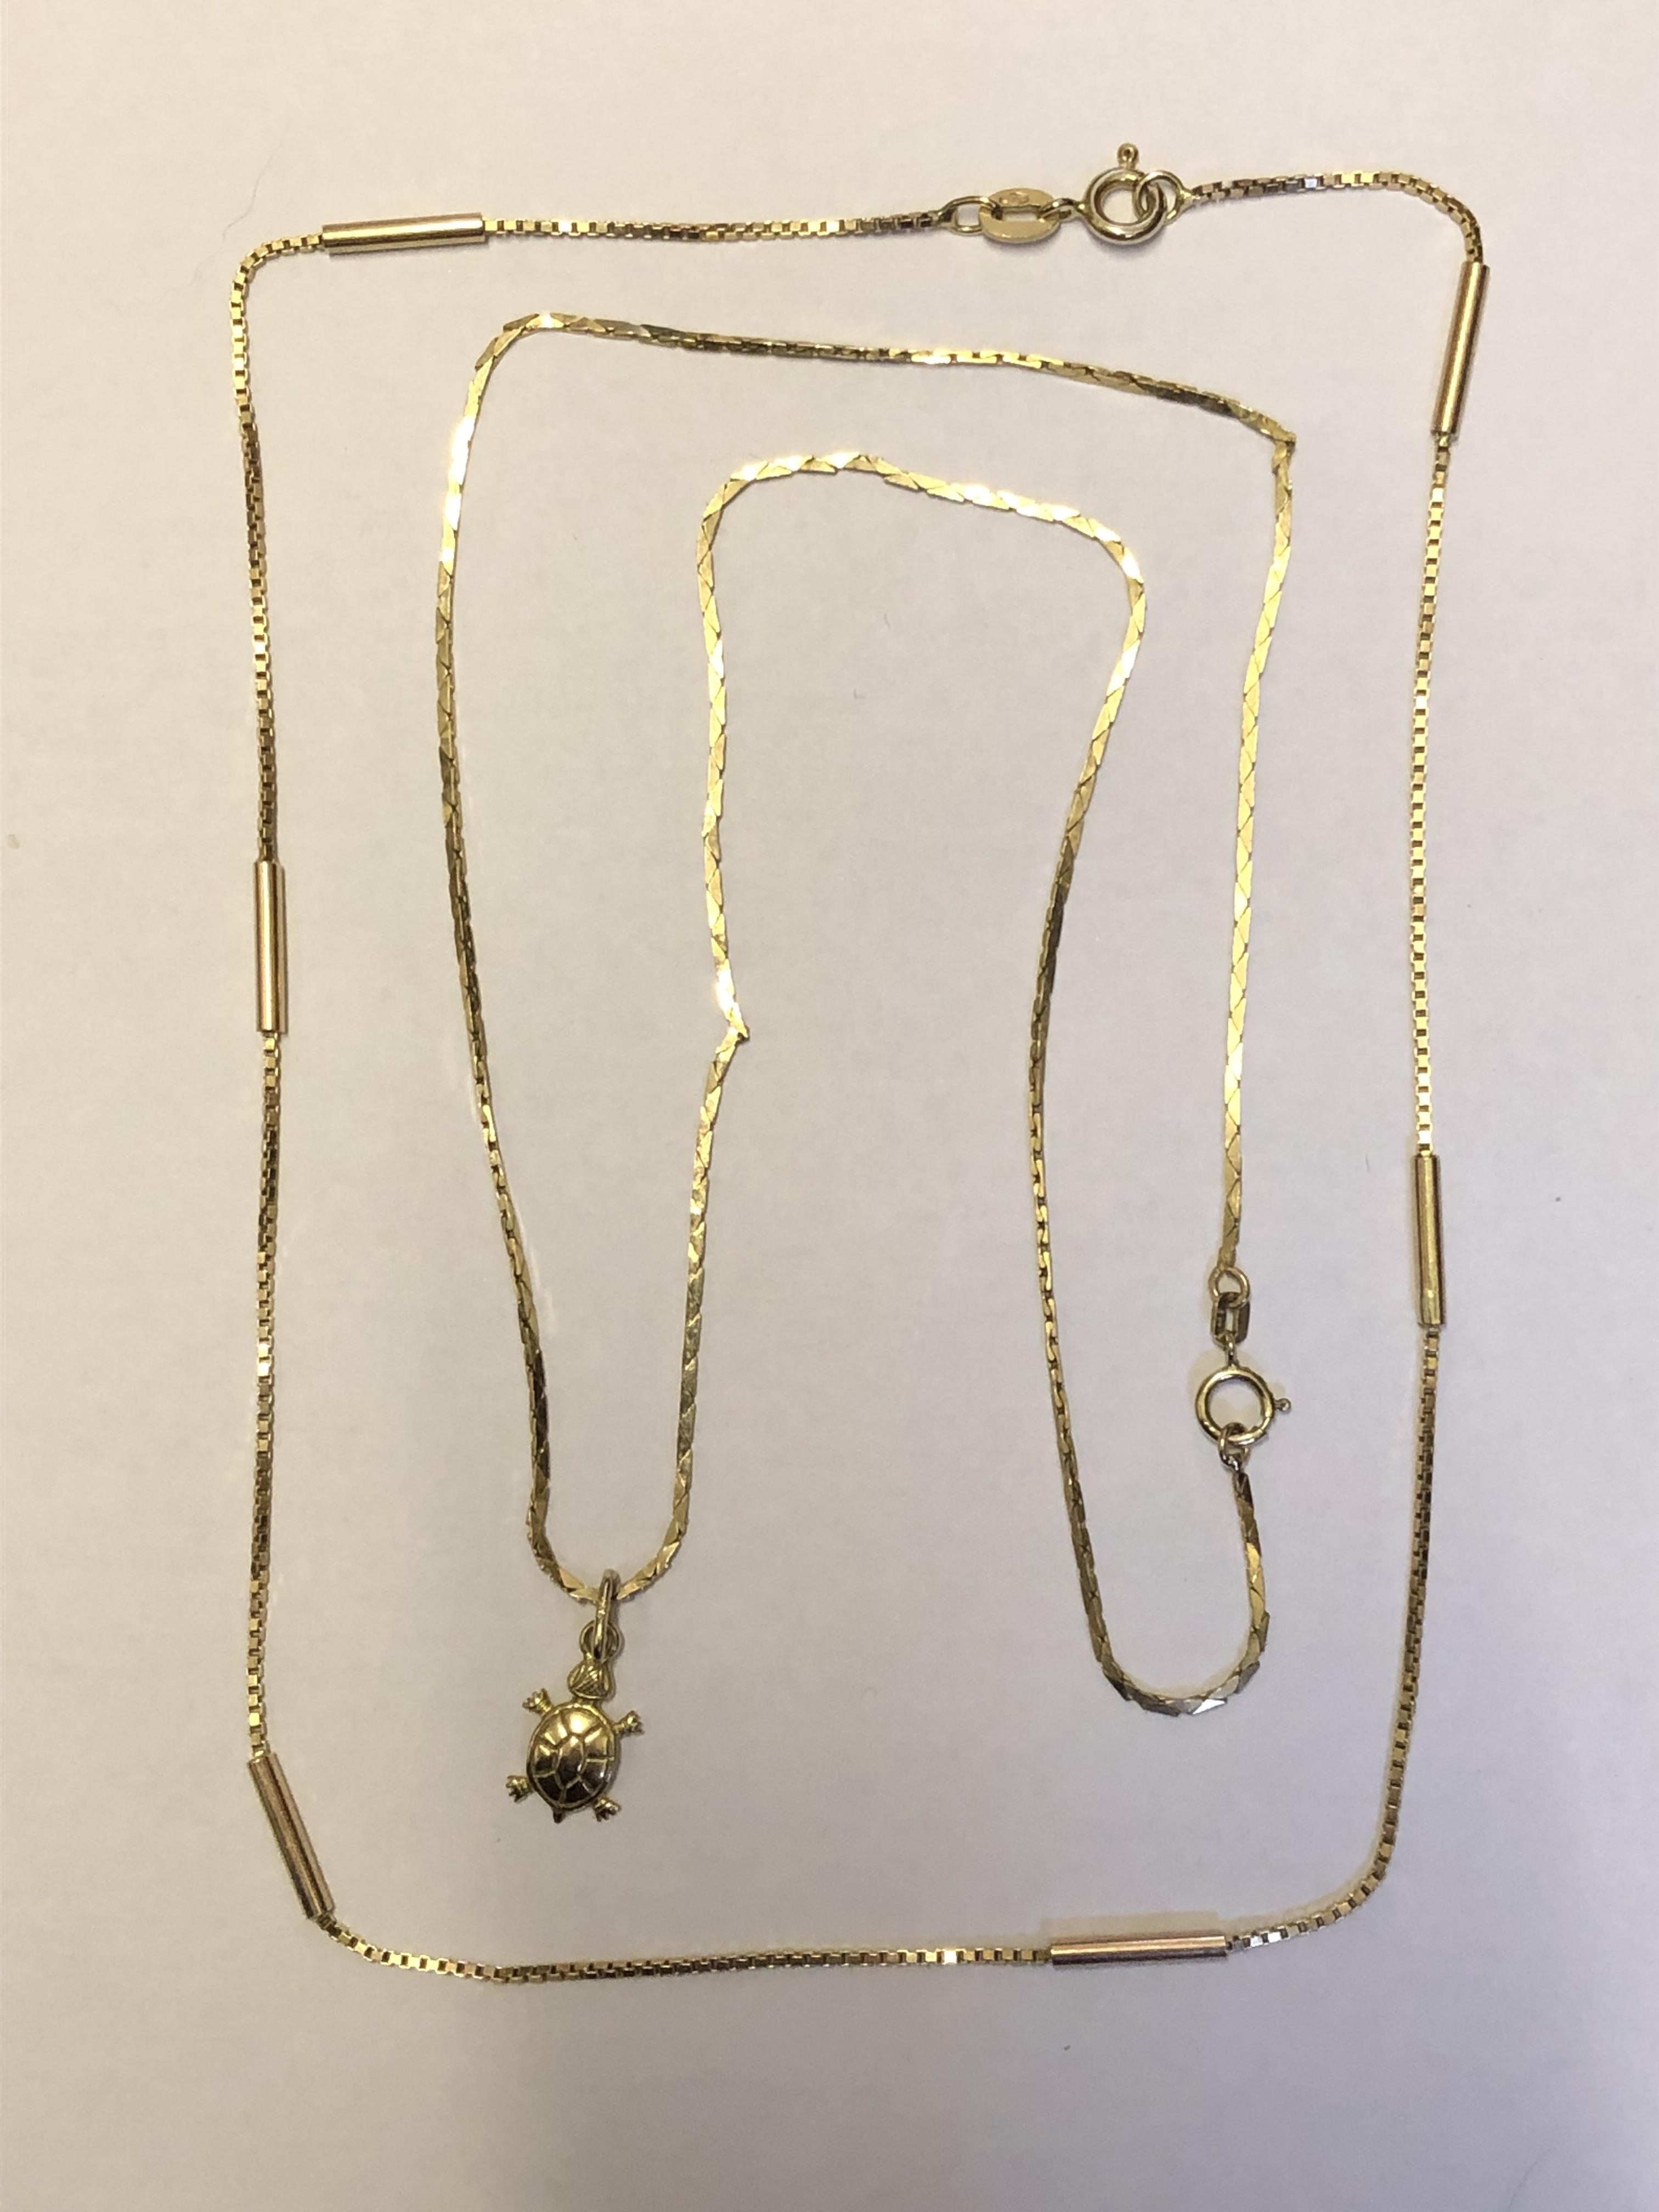 9CT GOLD CUBE LINK CHAIN WITH A TORTOISE PENDANT AND A 9CT GOLD CUBE AND BARREL LINK CHAIN 8.